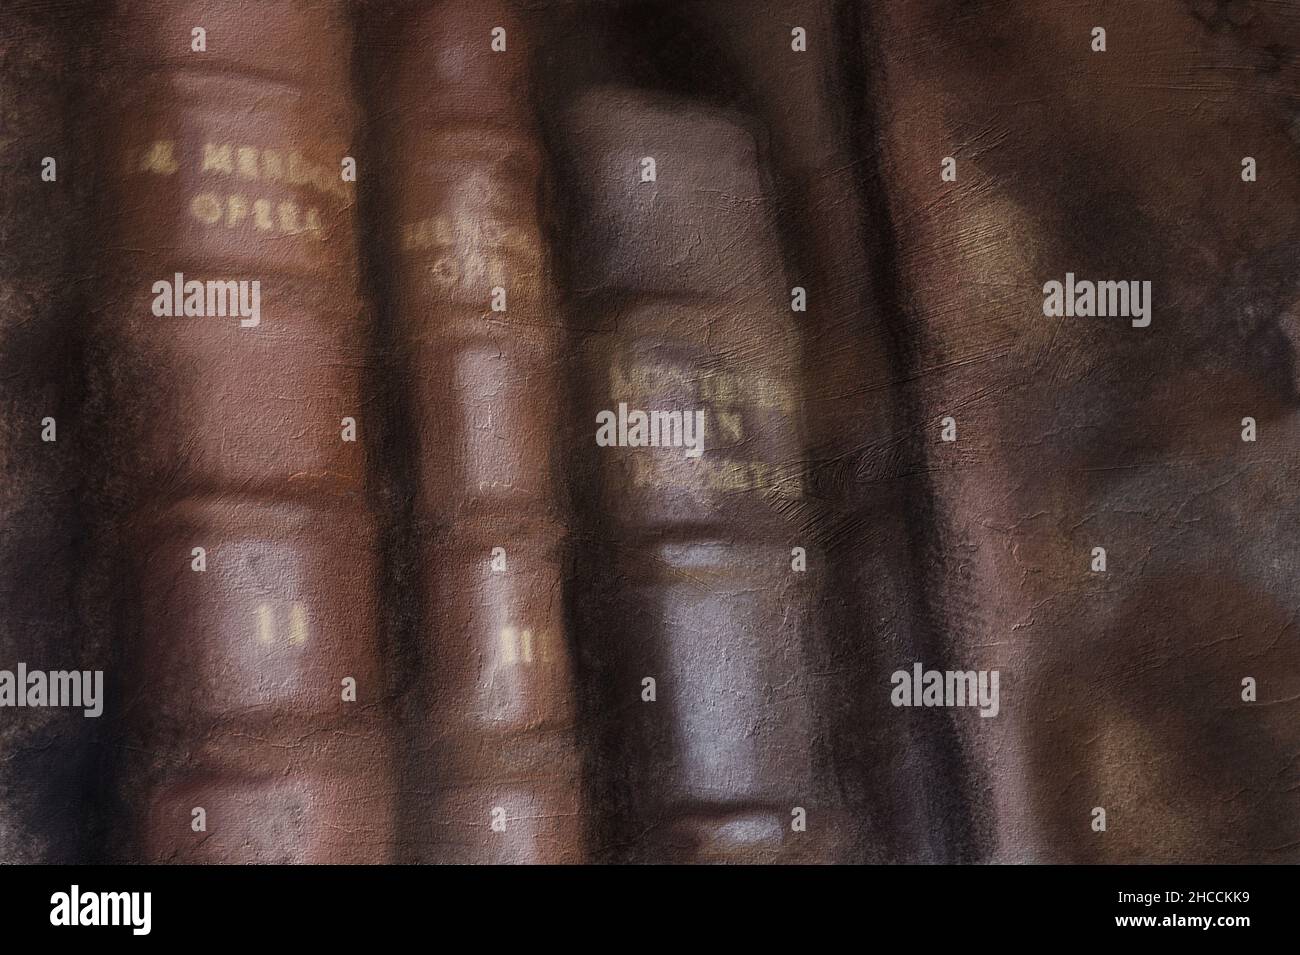 Oil painting old books Stock Photo